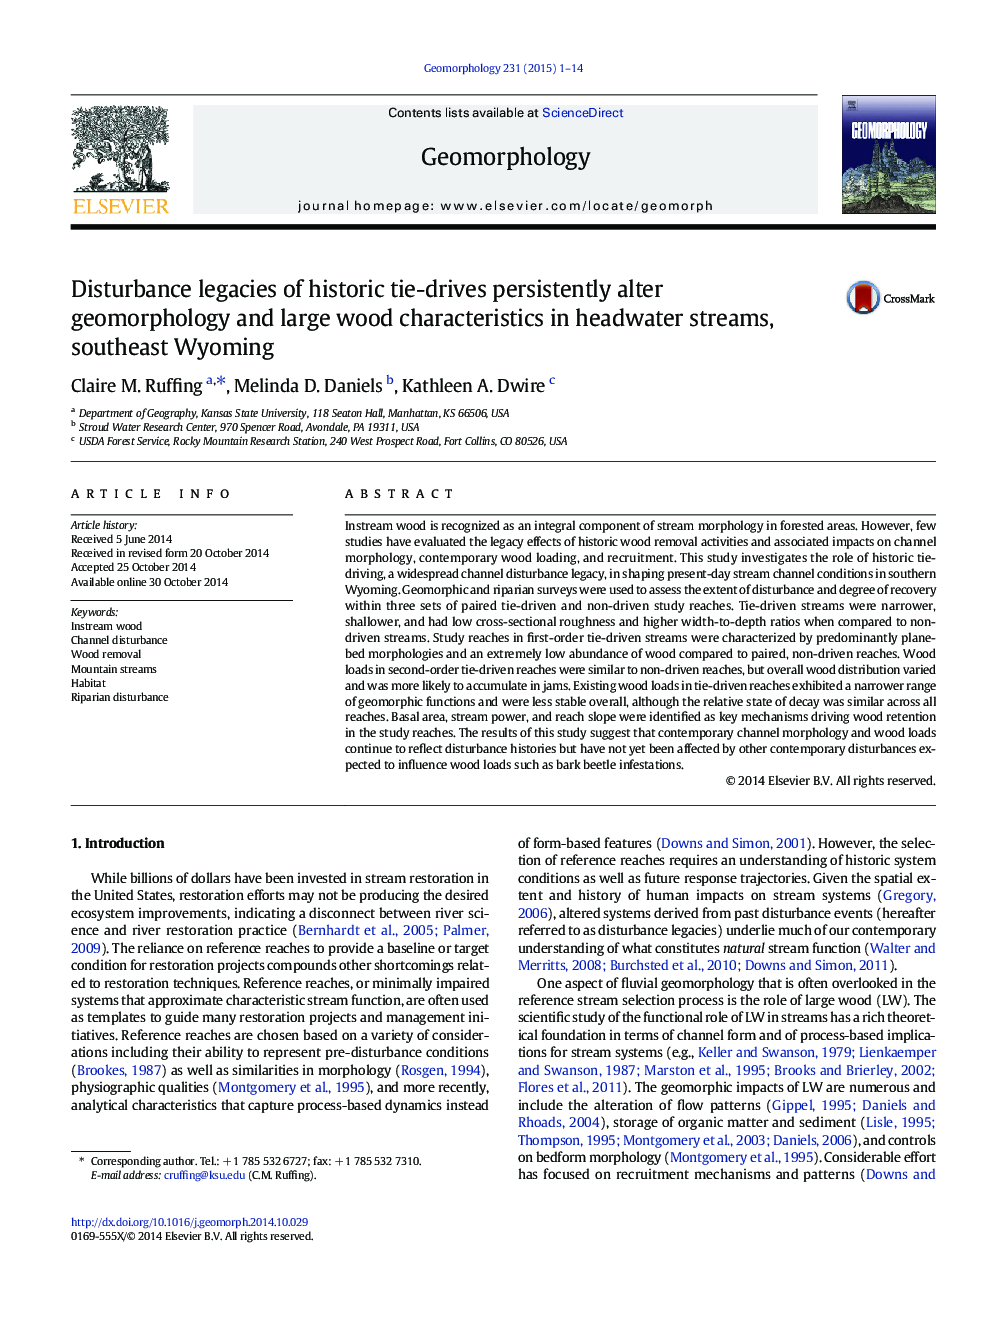 Disturbance legacies of historic tie-drives persistently alter geomorphology and large wood characteristics in headwater streams, southeast Wyoming